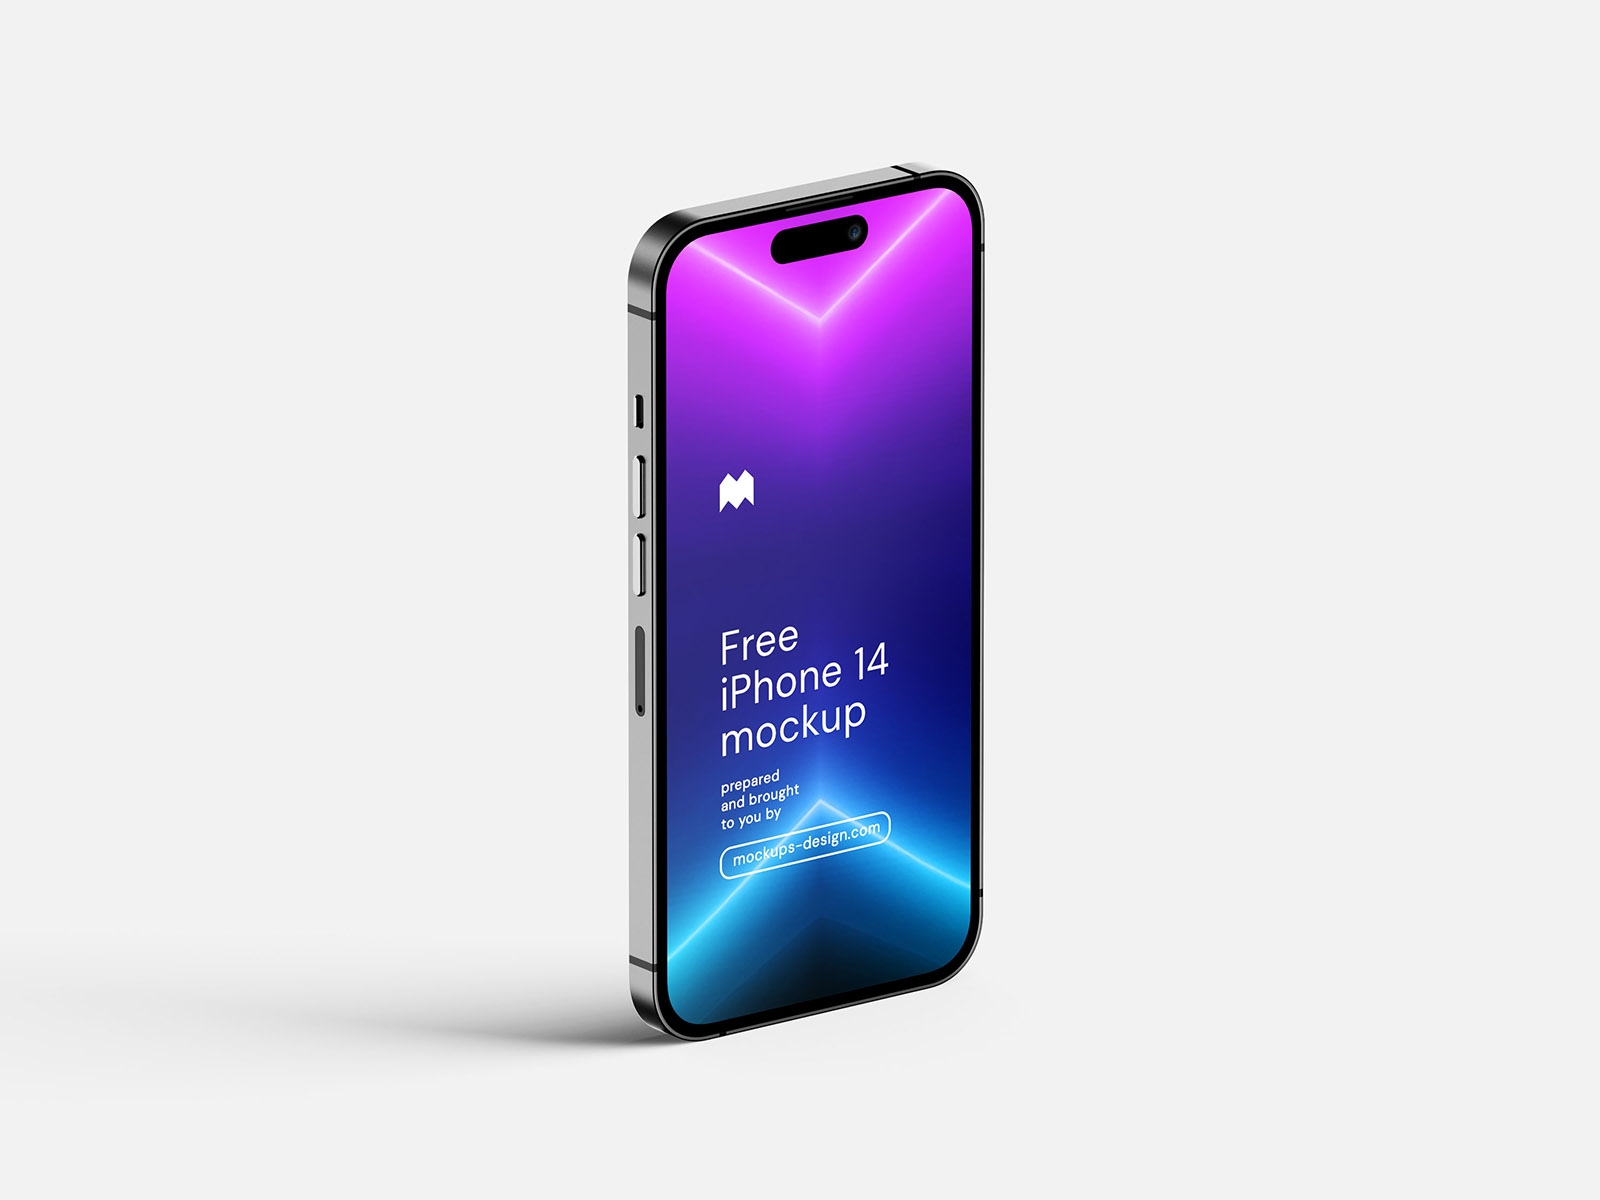 Perspective and Front View of 5 iPhone 14 Mockup FREE PSD